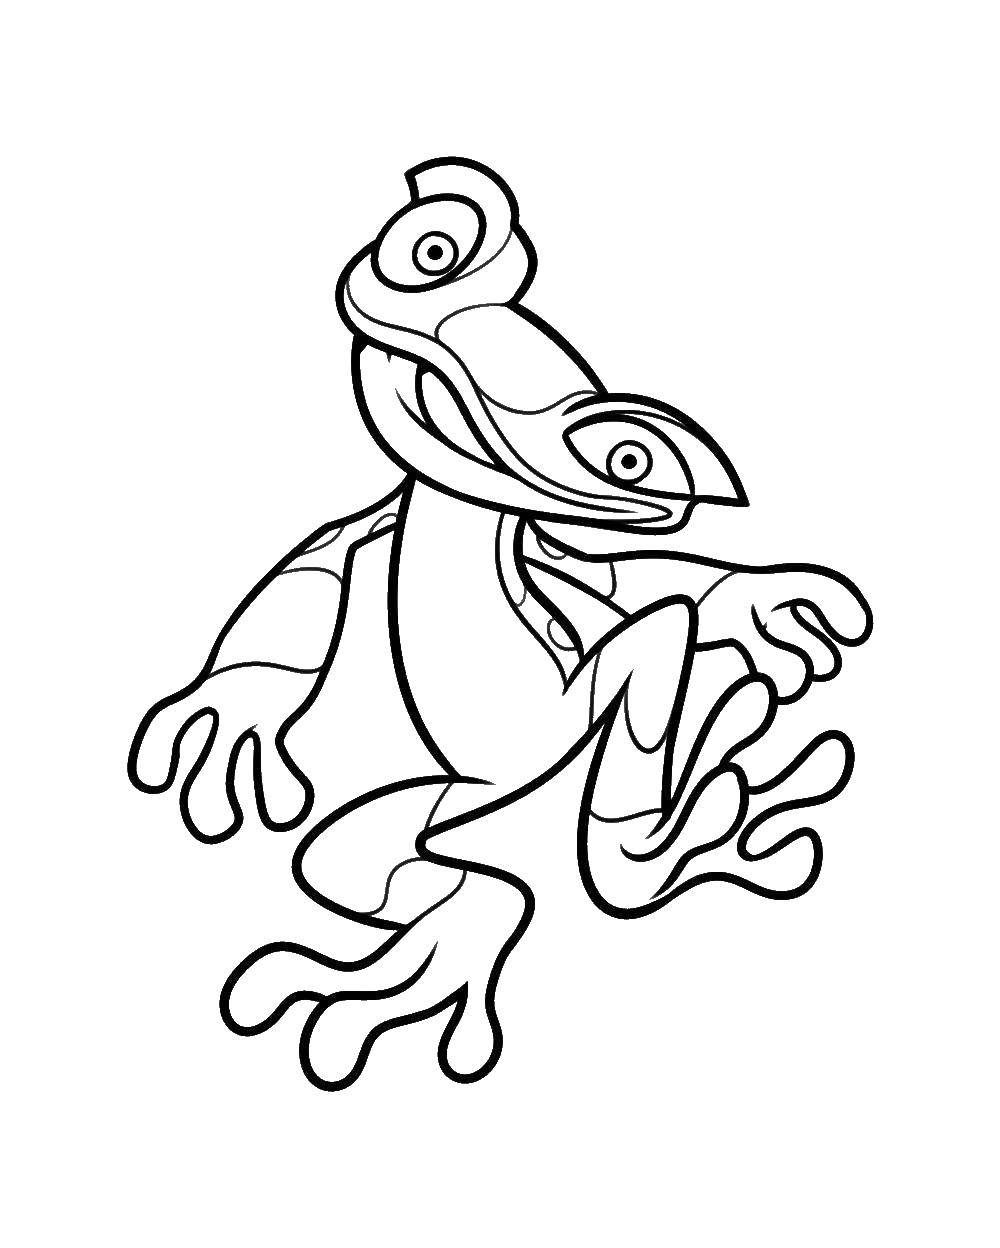 Coloring Frog. Category frogs. Tags:  the frog.